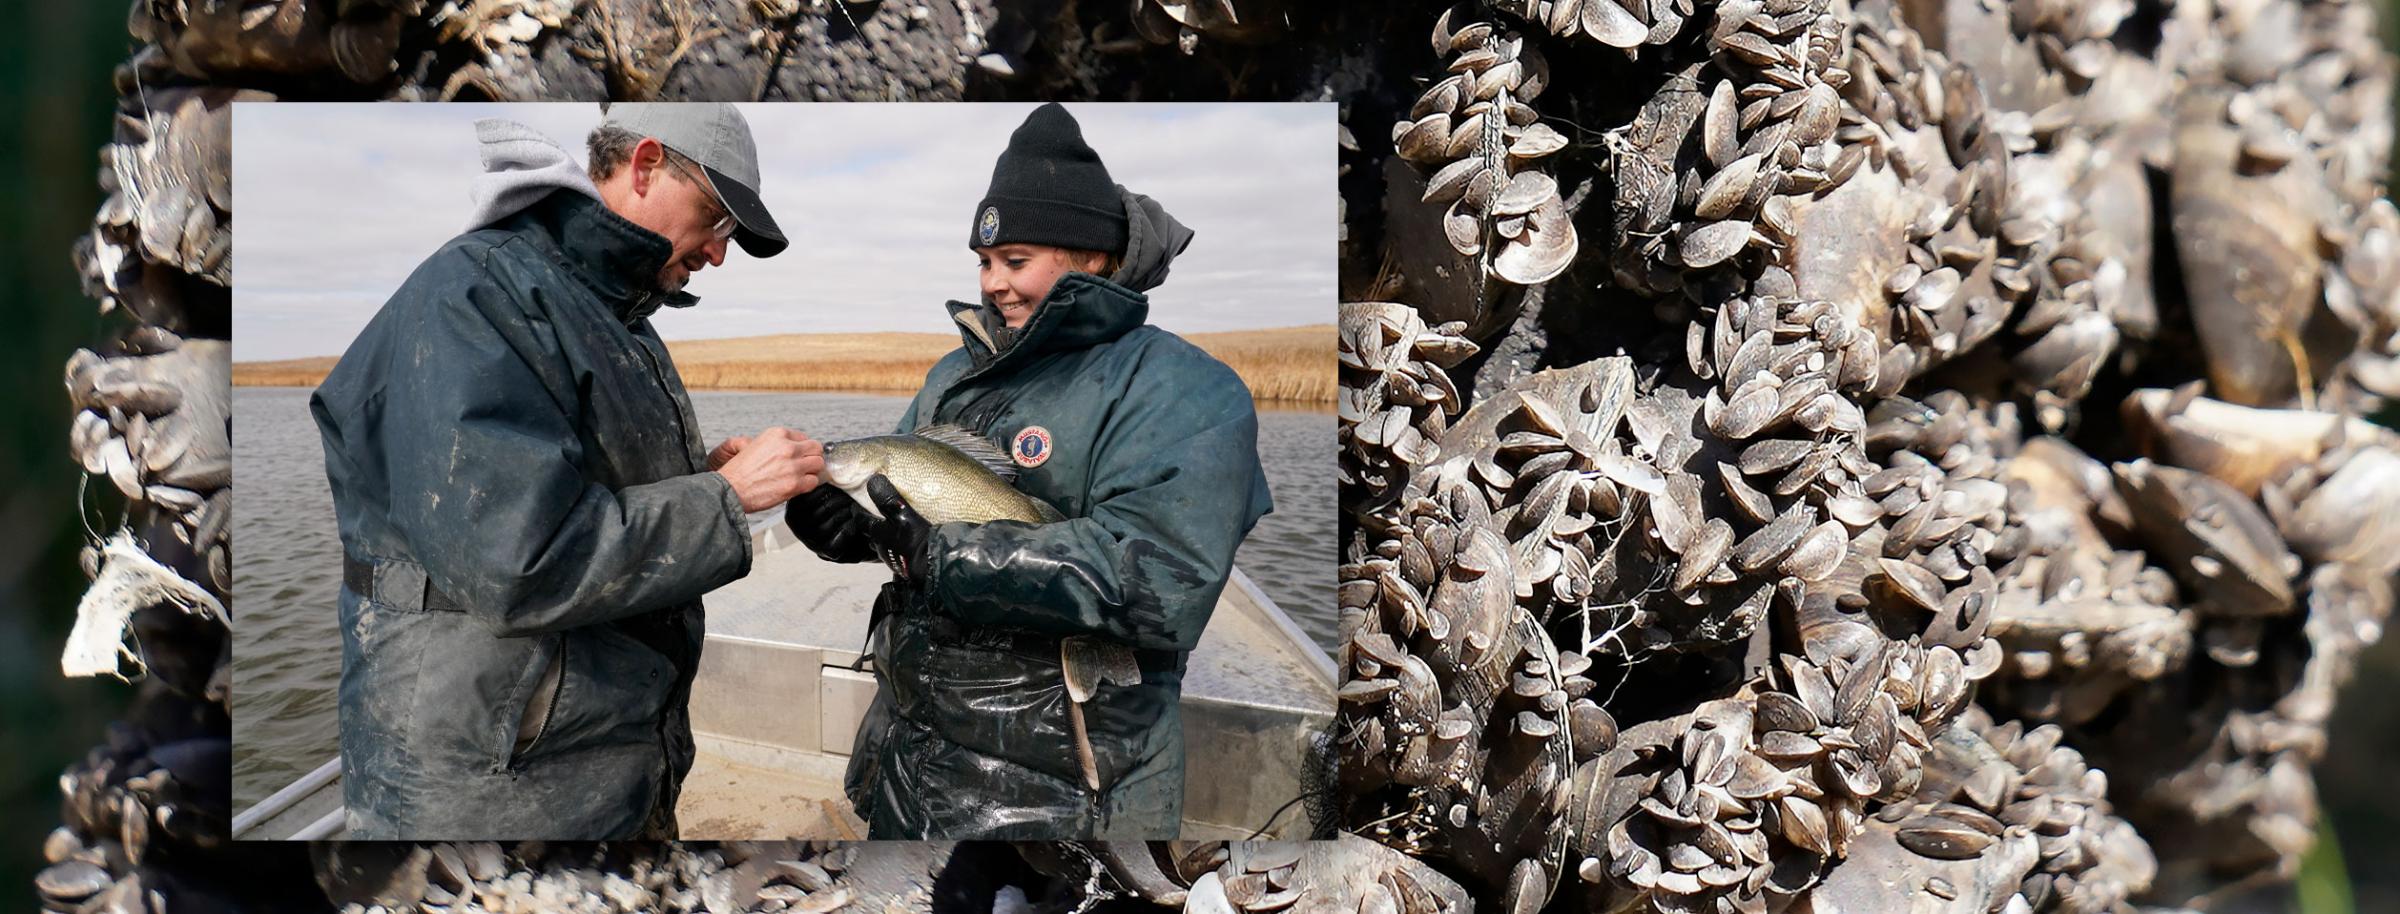 Department staff tagging walleye with zebra mussels on background photo